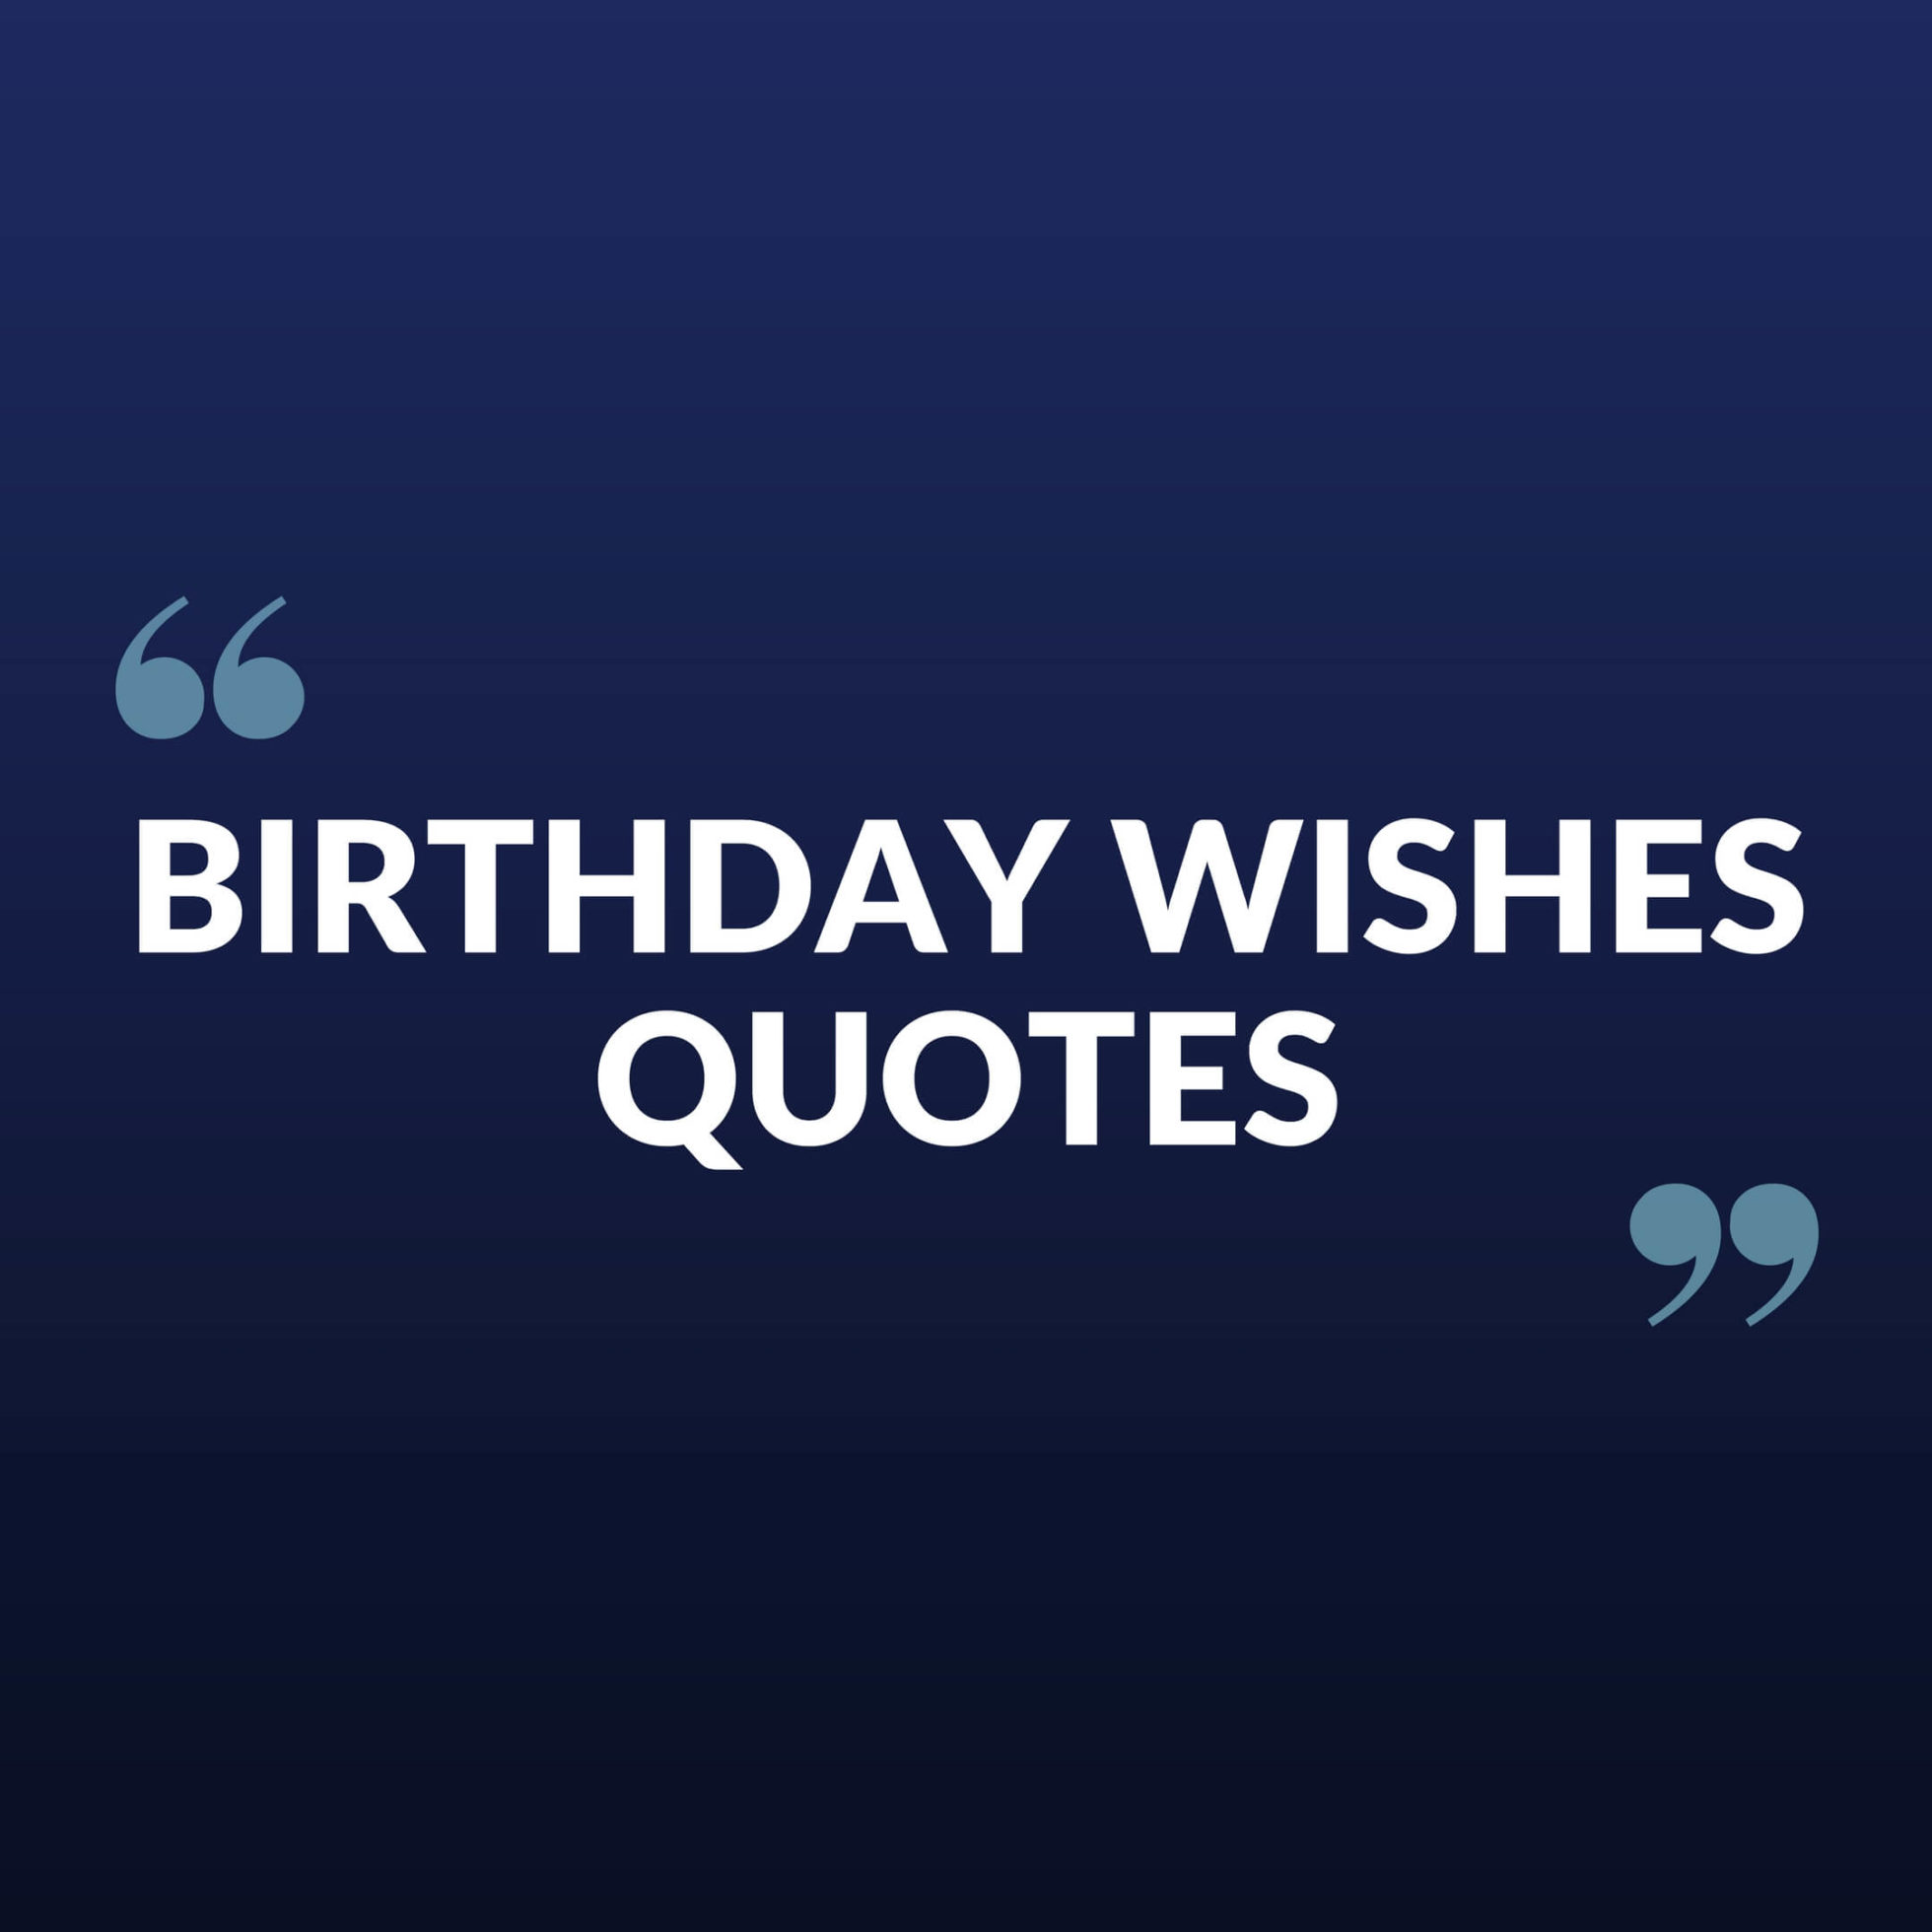 Birthday Wishes Picture Quotes, Find Best birthday wishes picture quotes.